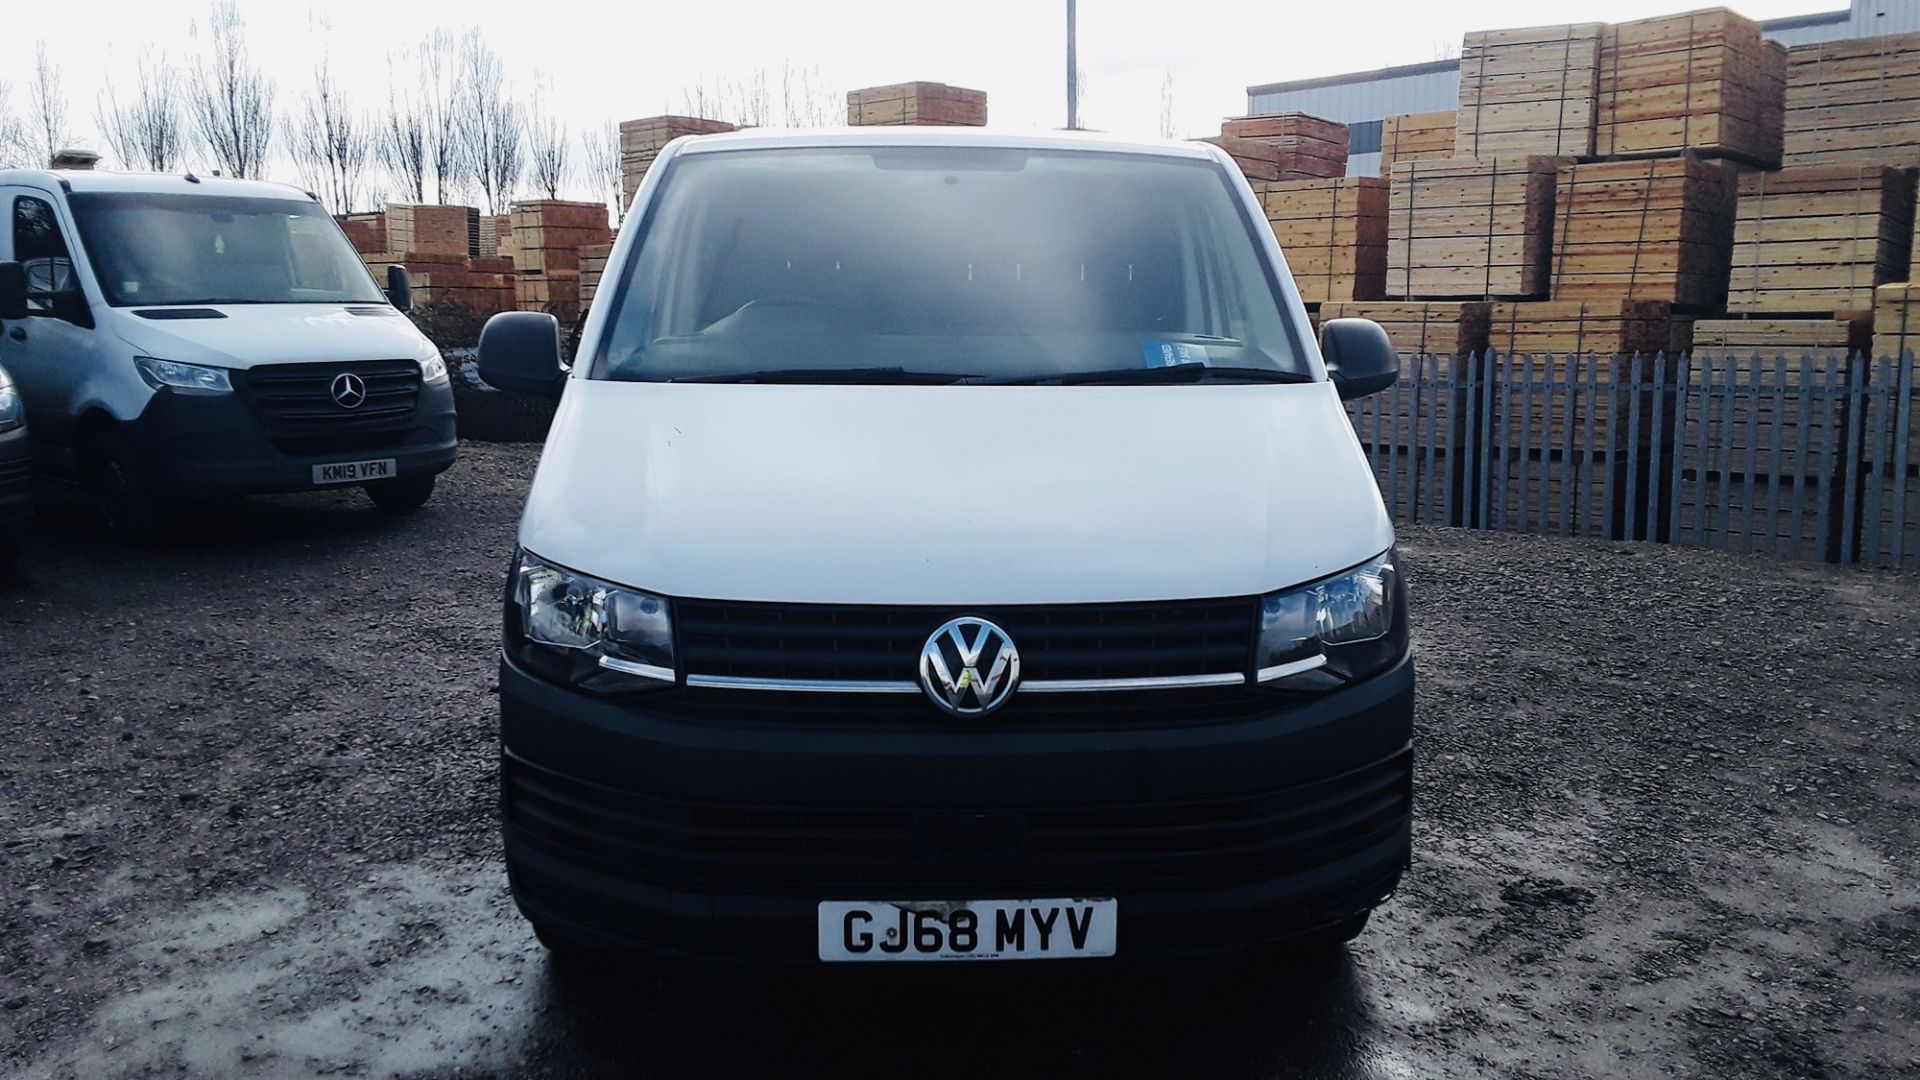 VOLKSWAGEN TRANSPORTER 2.0TDI BMT "BUSINESS EDITION" EURO 6 -68 REG -AIR CON - ONLY 78K - Image 2 of 9